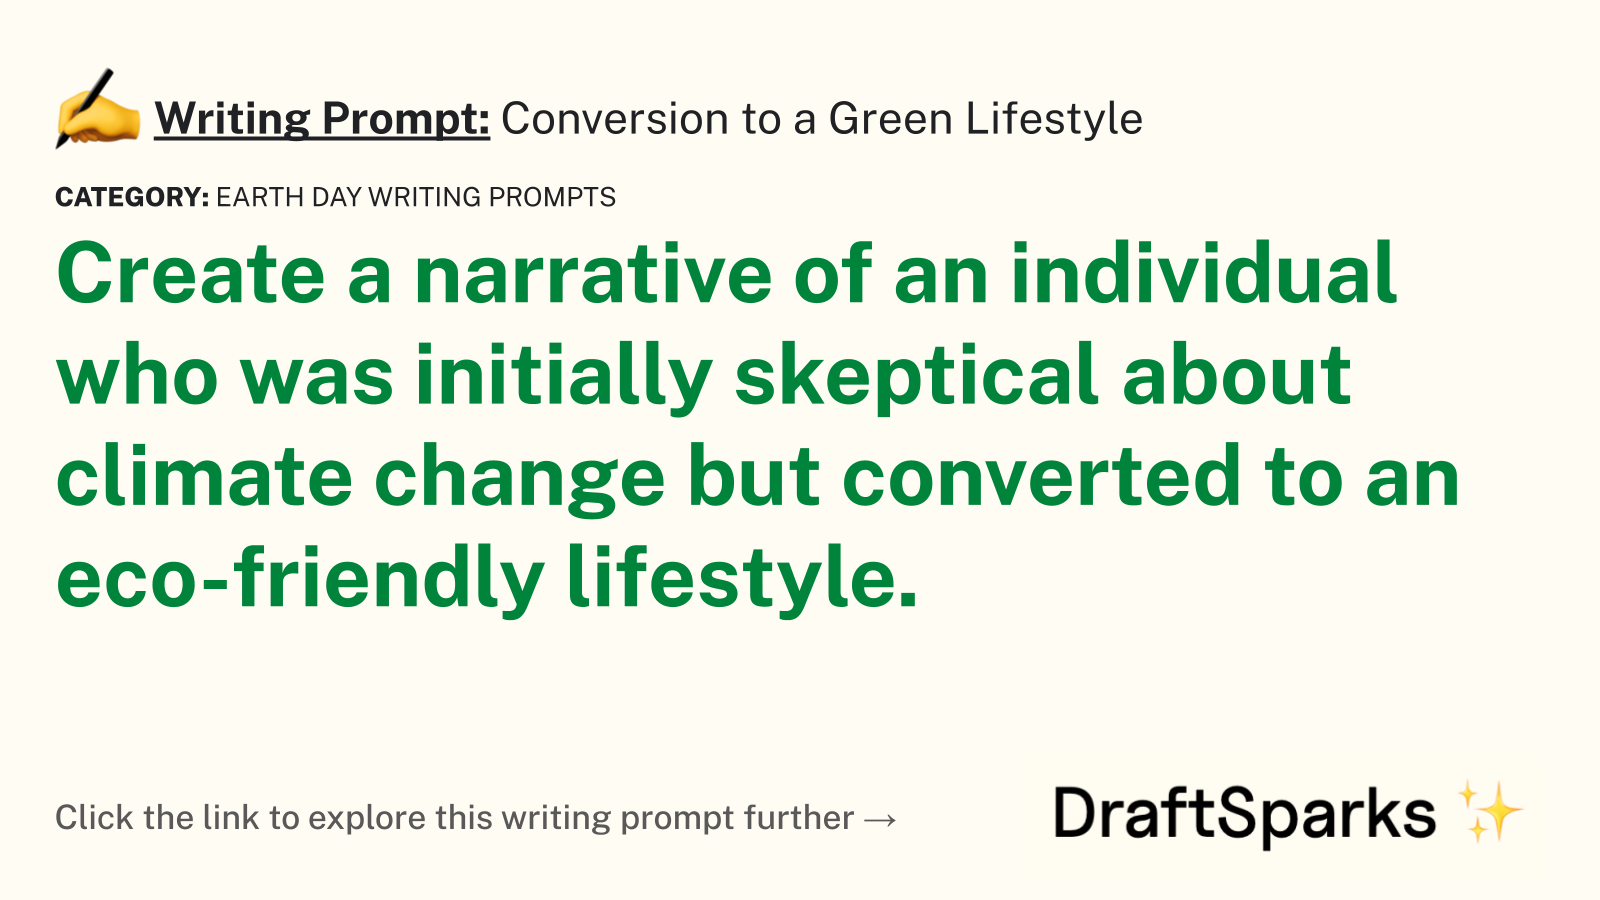 Conversion to a Green Lifestyle